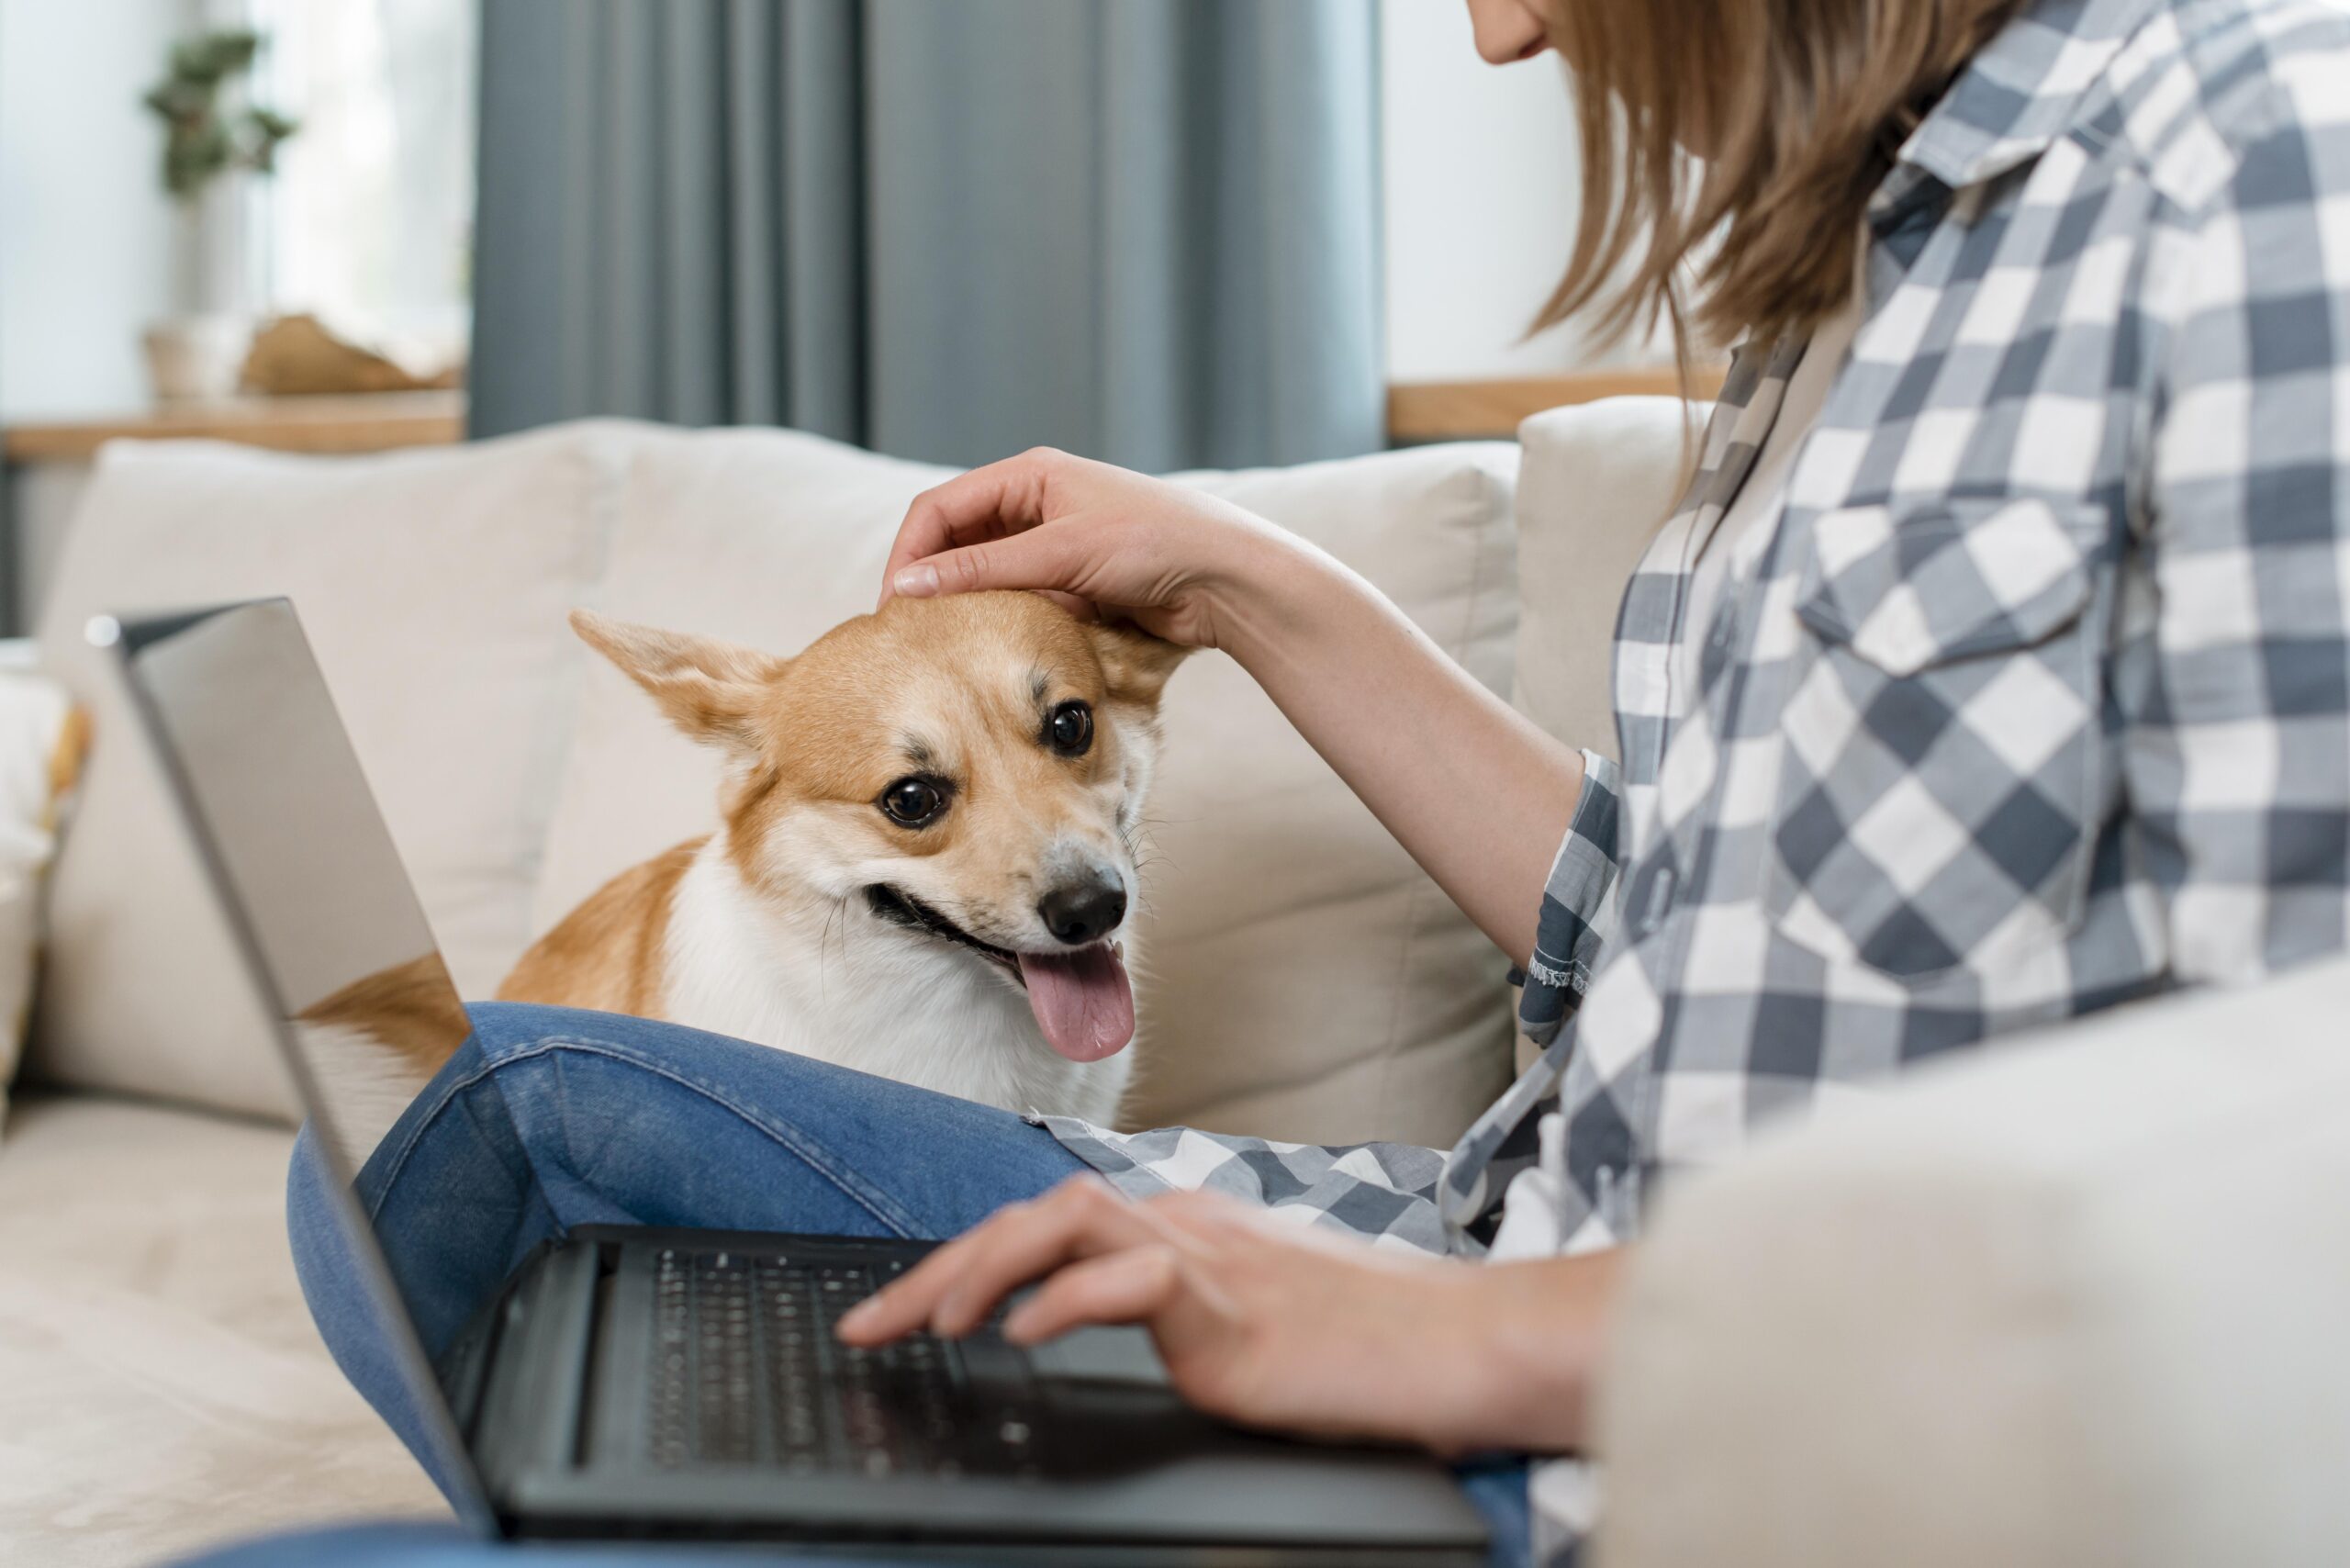 Singaporean pet owner petting her dog while loooking at the pet care subscription plan